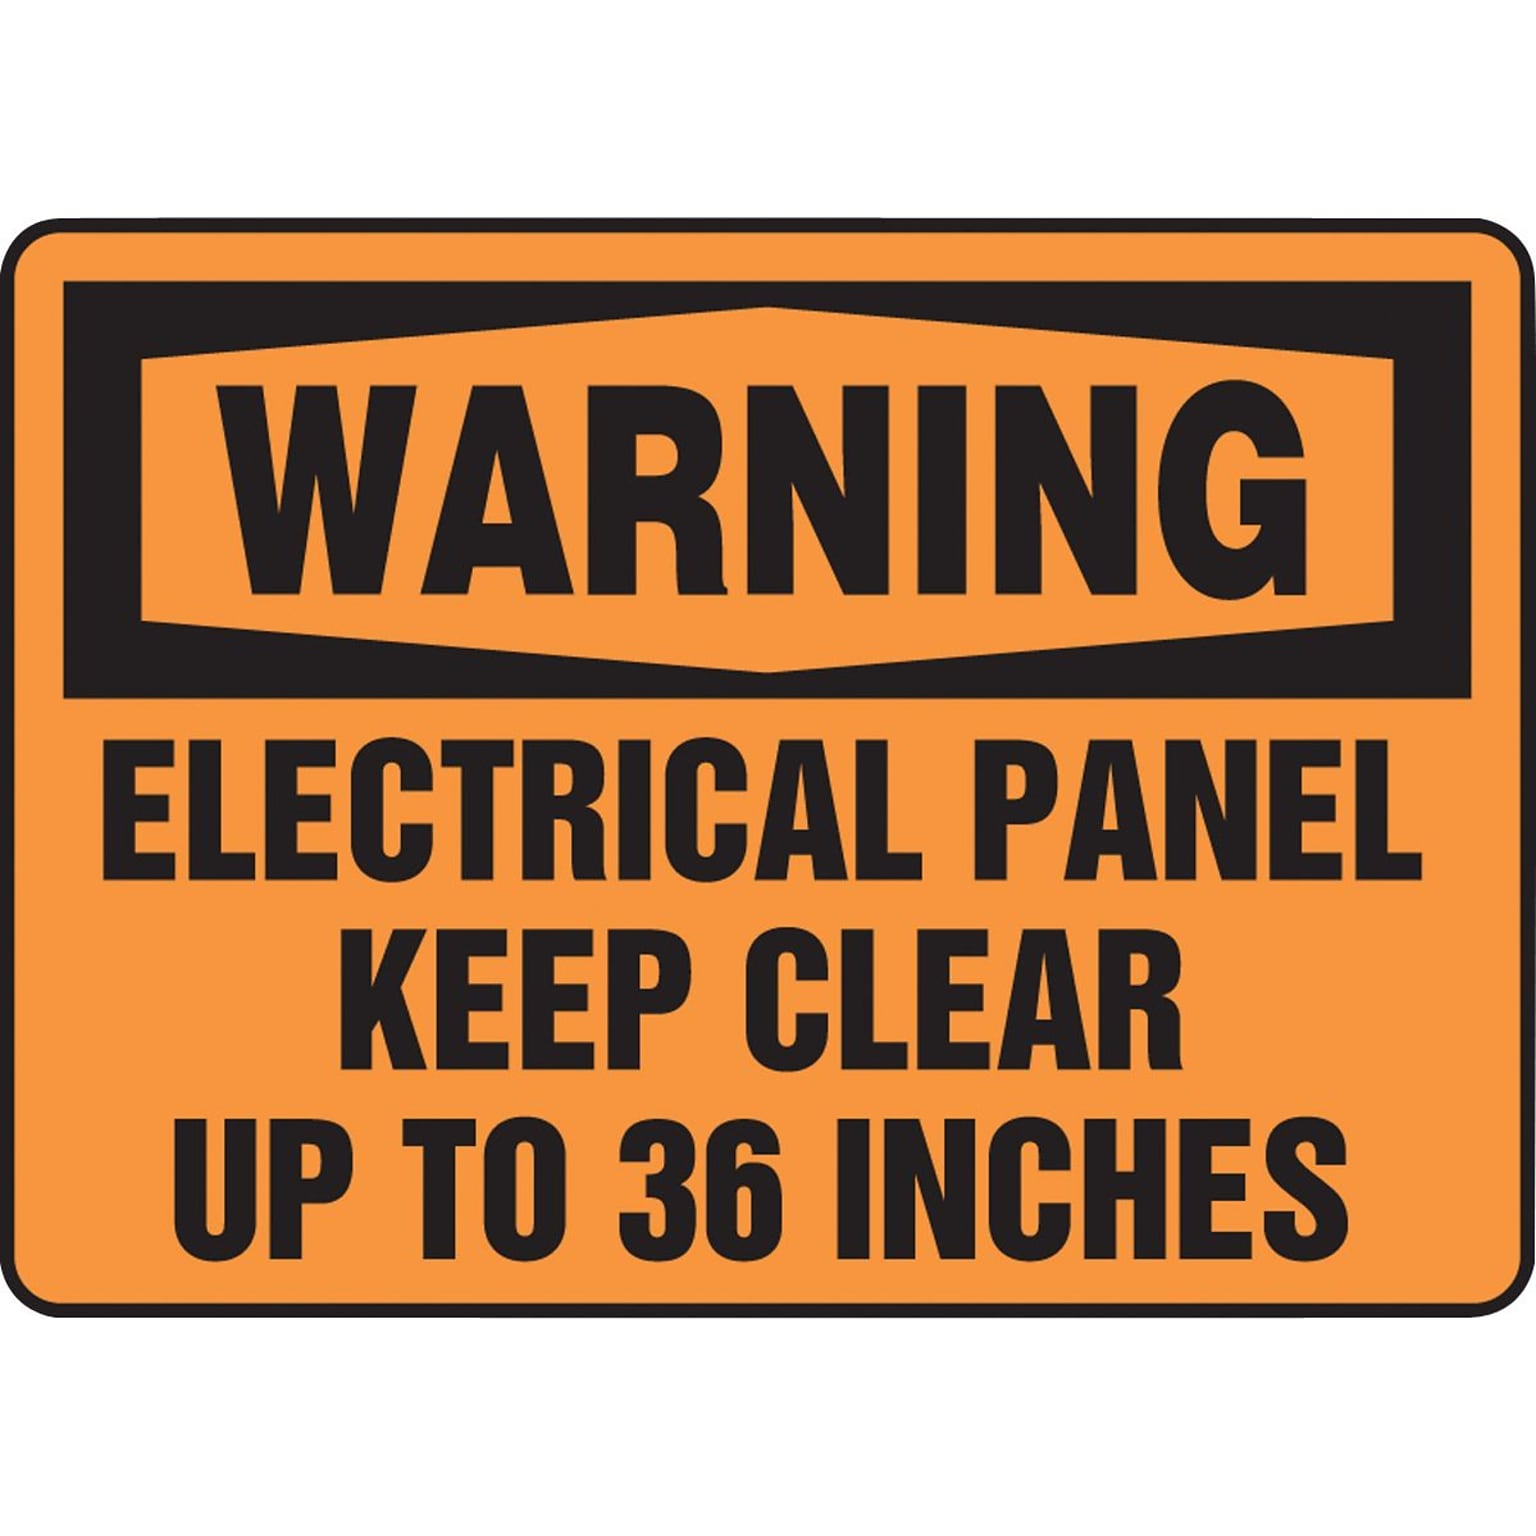 Accuform Safety Sign, WARNING ELECTRICAL PANEL KEEP CLEAR UP TO 36 INCHES, 7 x 10, Plastic (MELC309VP)